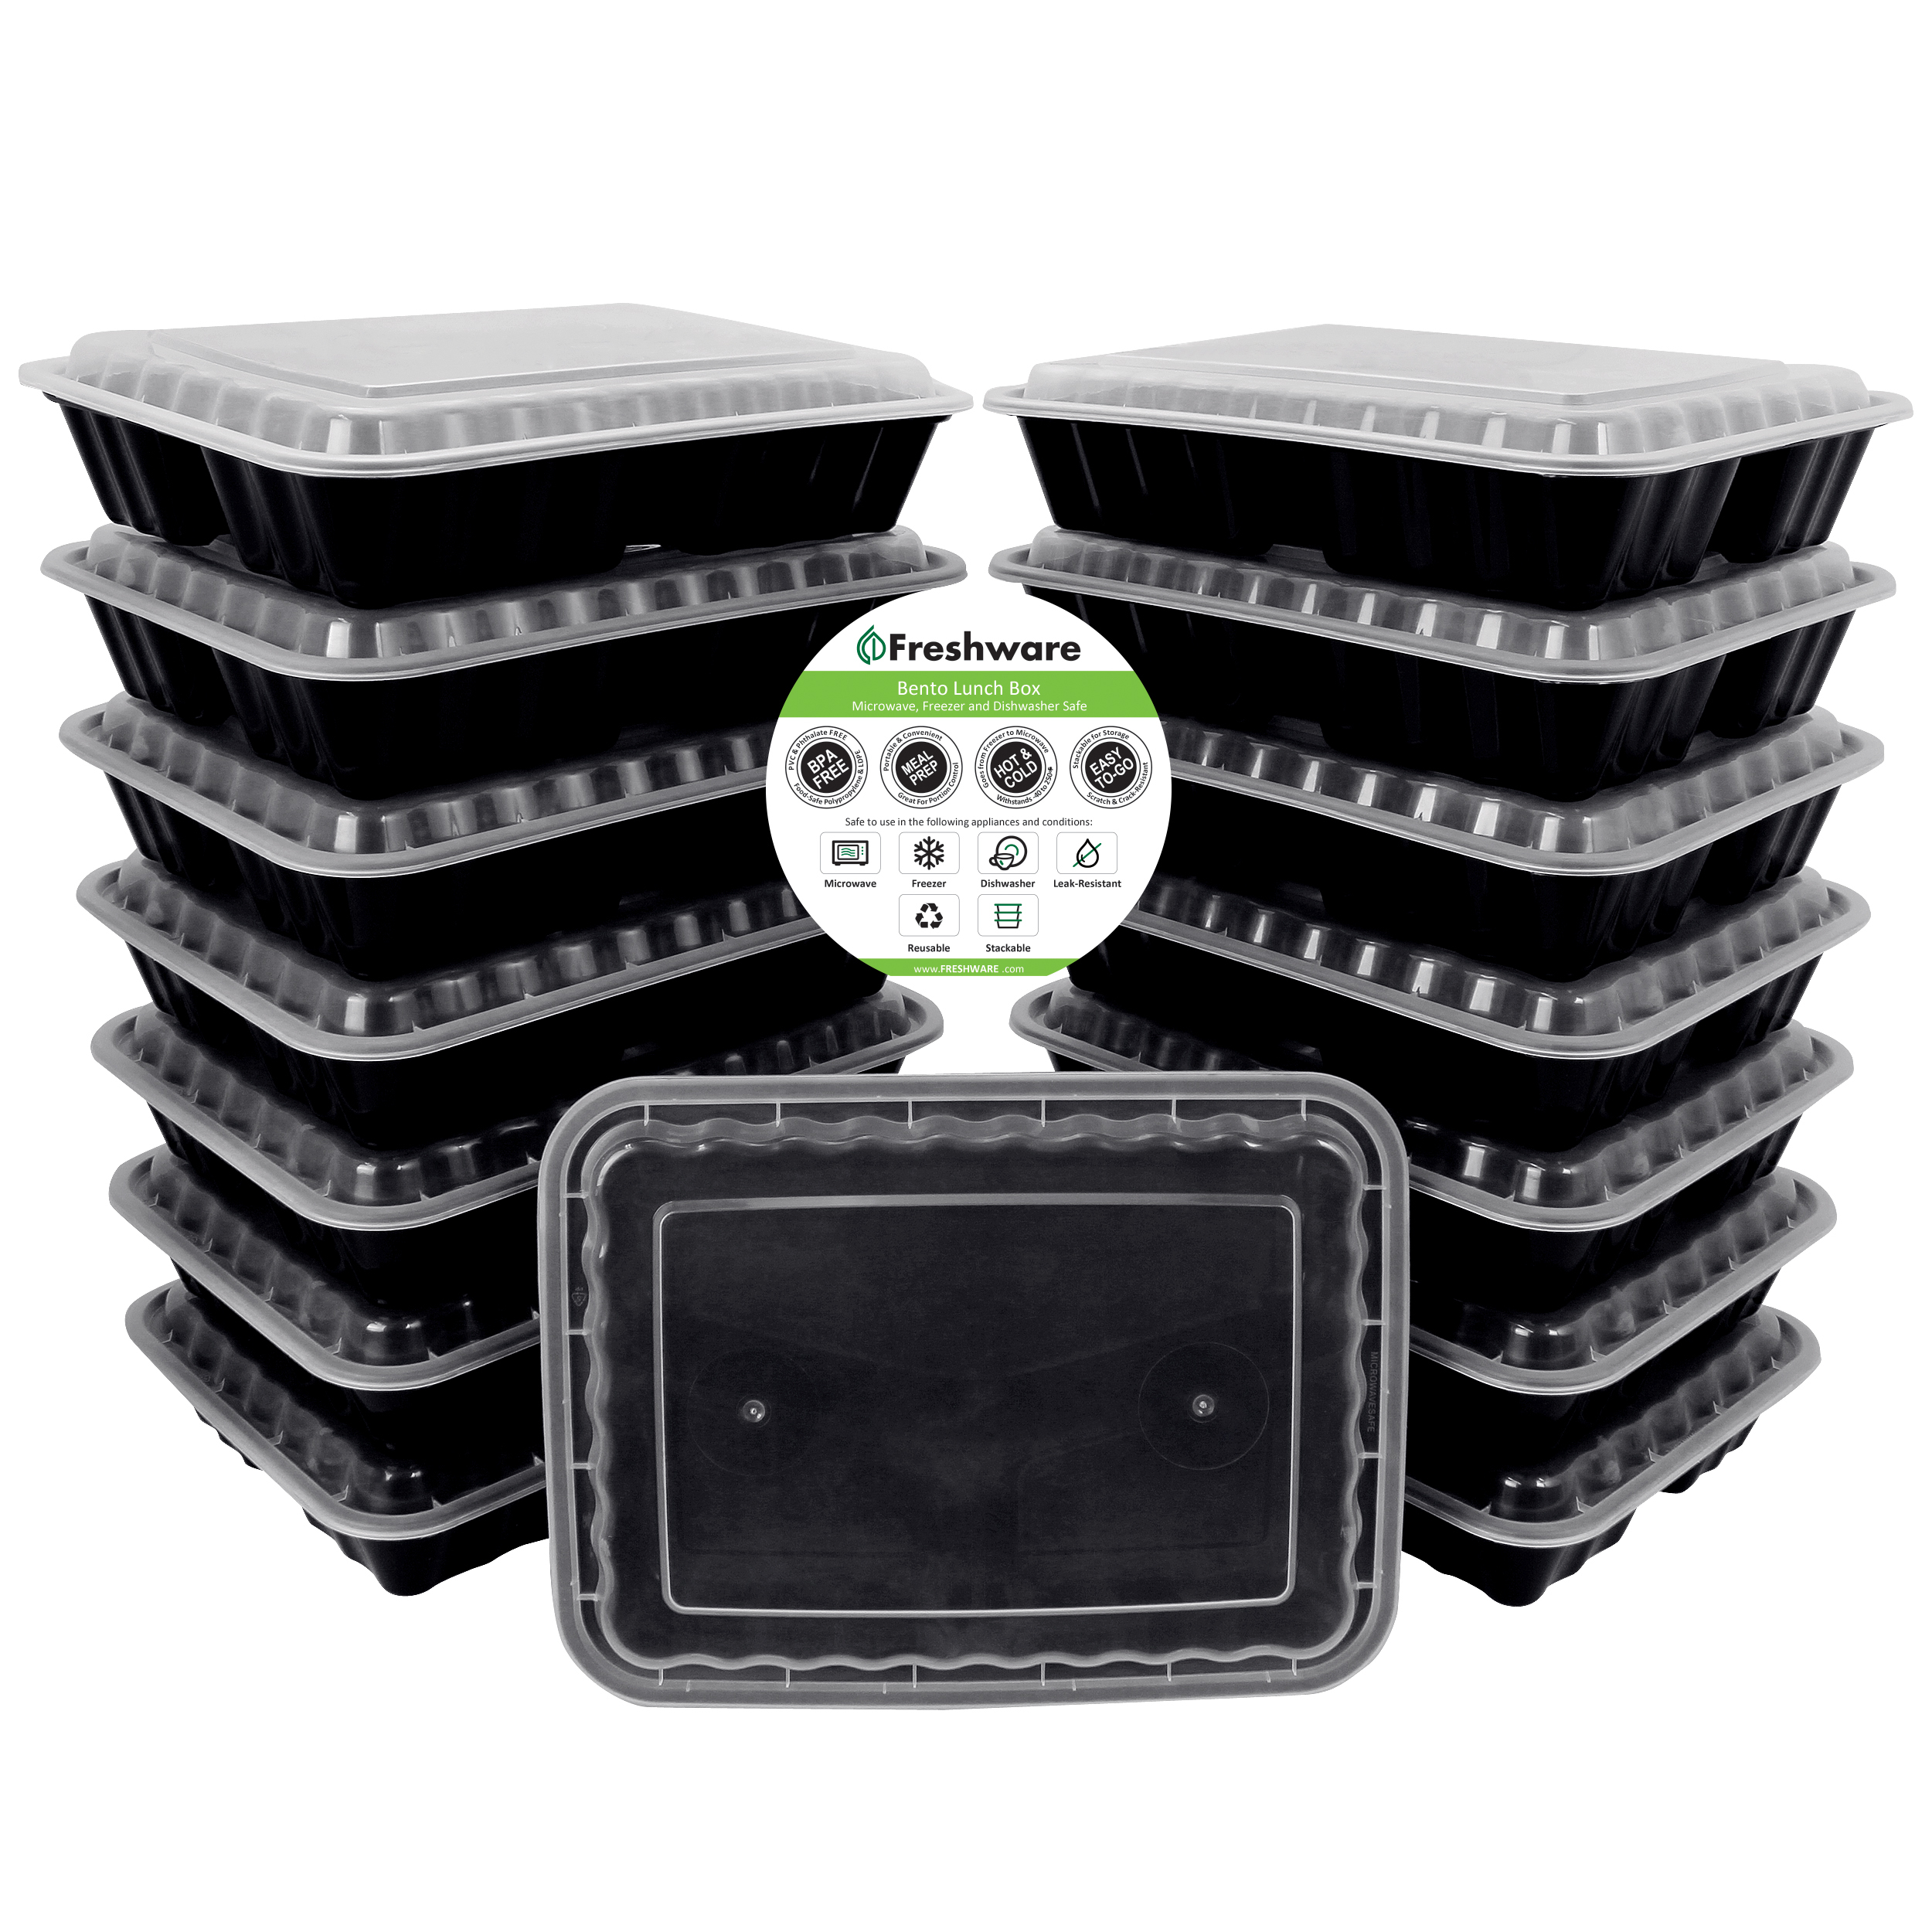 Freshware 15-Pack 3 Compartment Bento Lunch Boxes with Lids - Meal Prep, Portion Control, 21 Day Fix & Food Storage Containers (36oz)